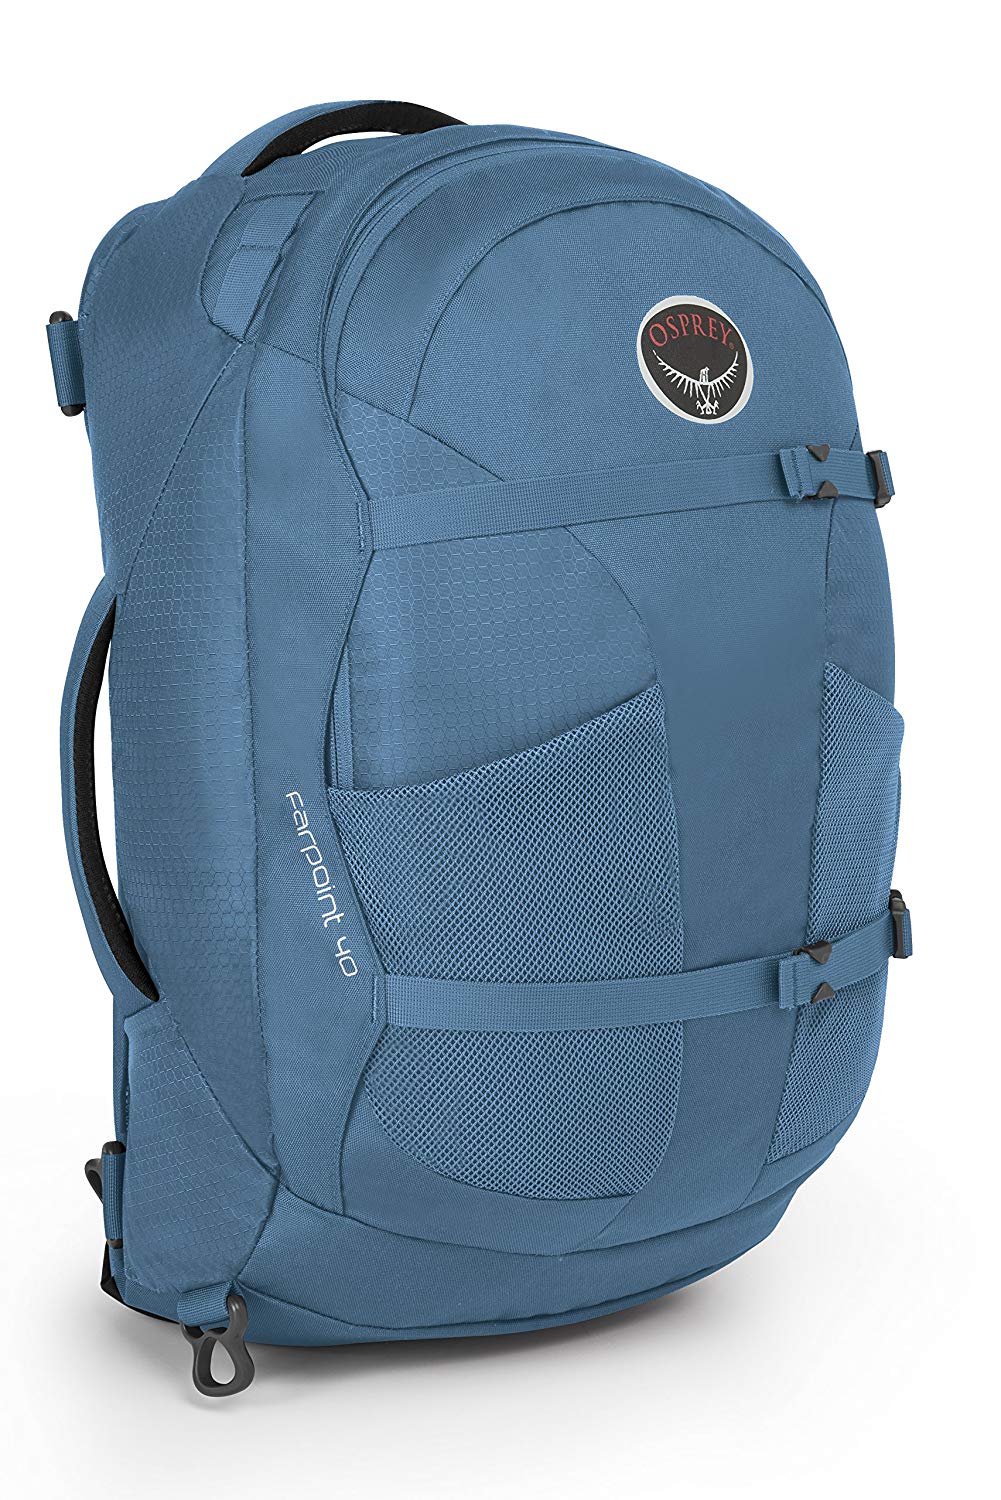 Outside Osprey Farpoint 40 Travel Backpack